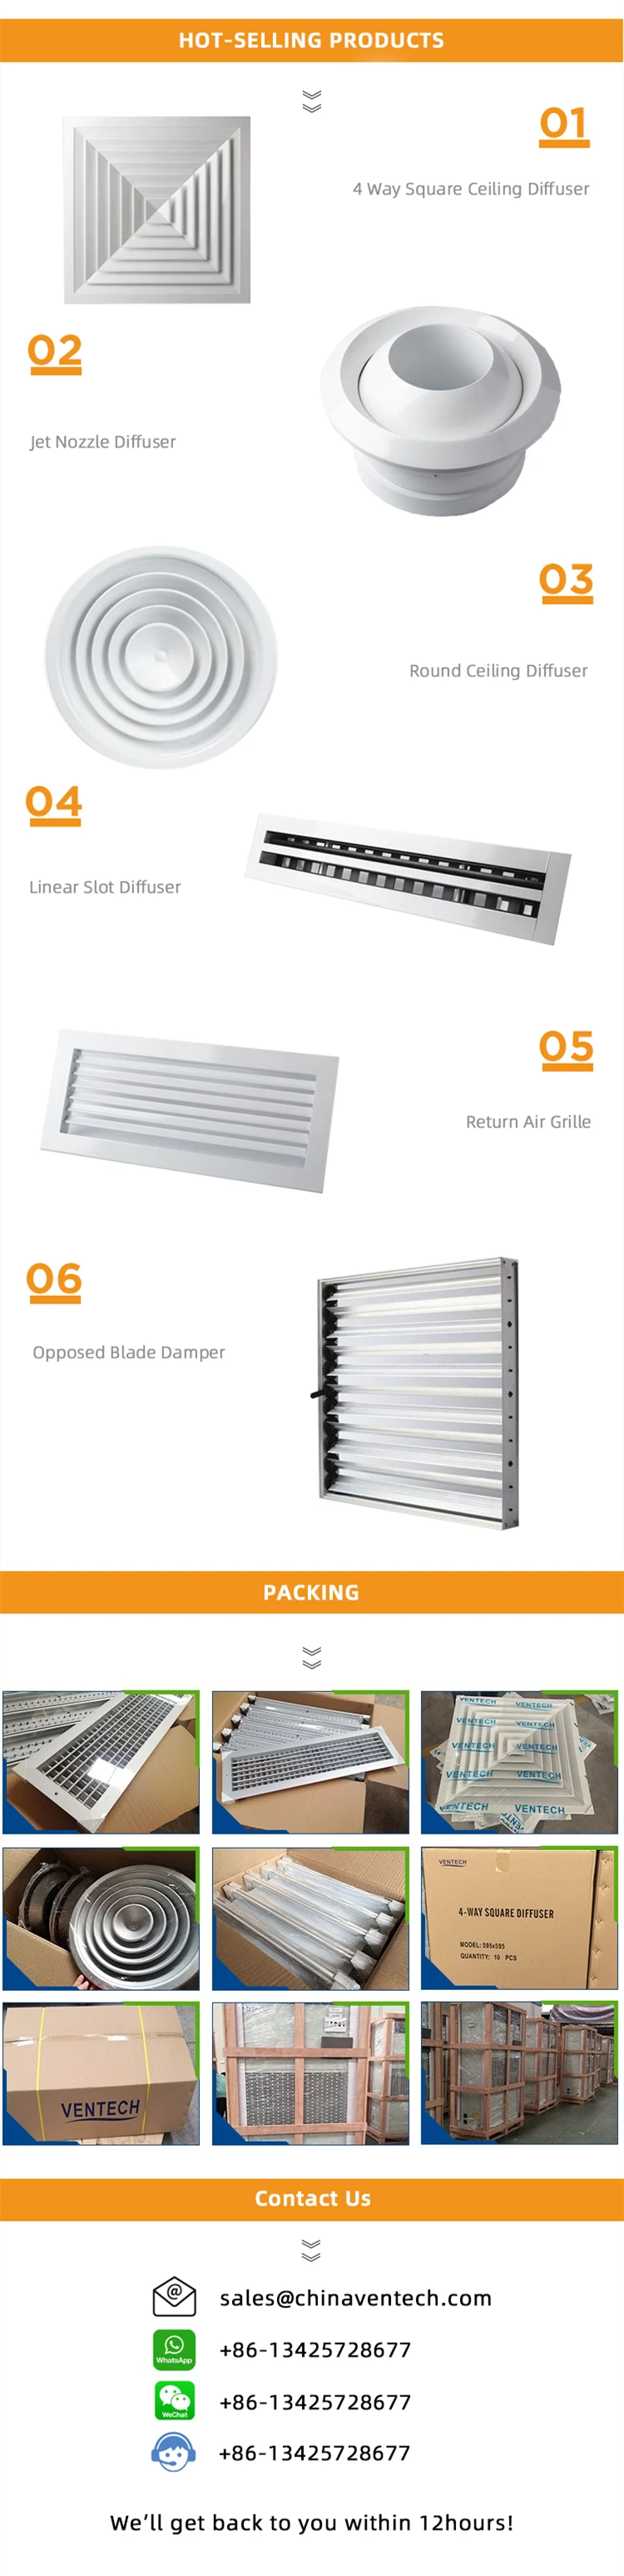 Clips Air Philippines Newest Diffuser For Hvac 3 Way Square